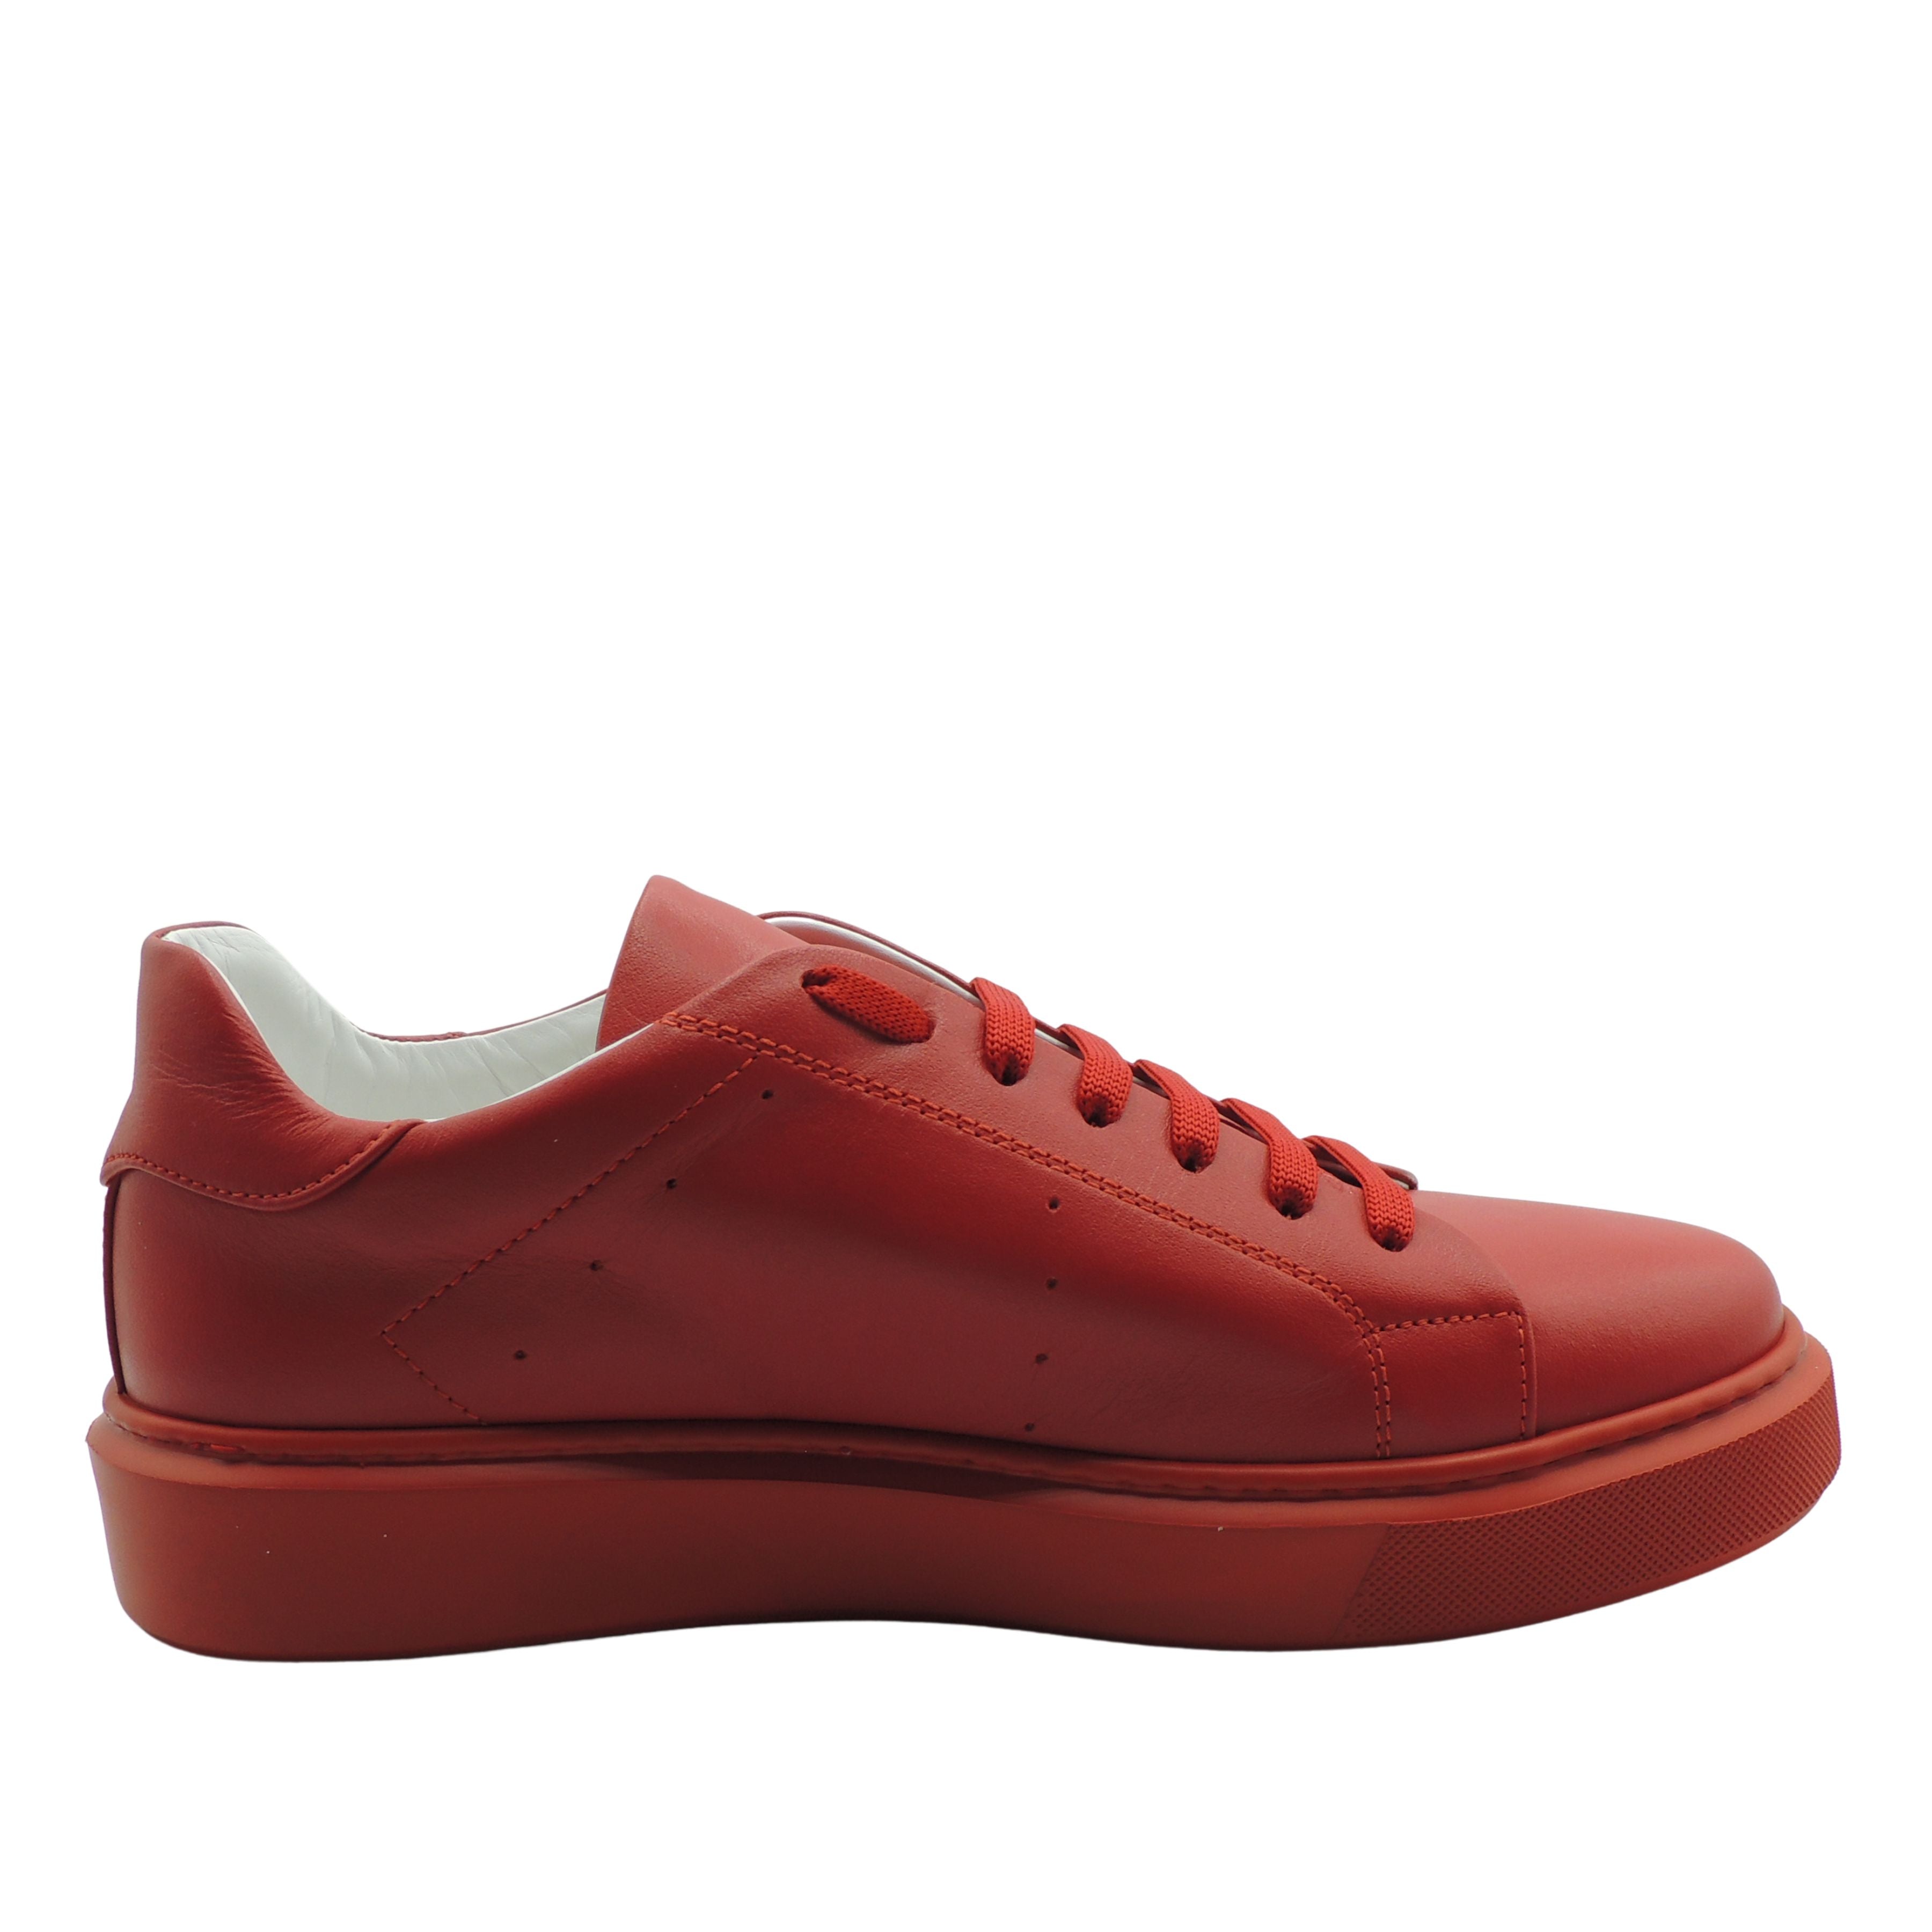 Philipp Plein Lo-Top Trainers Nappa Leather in Red UK 8